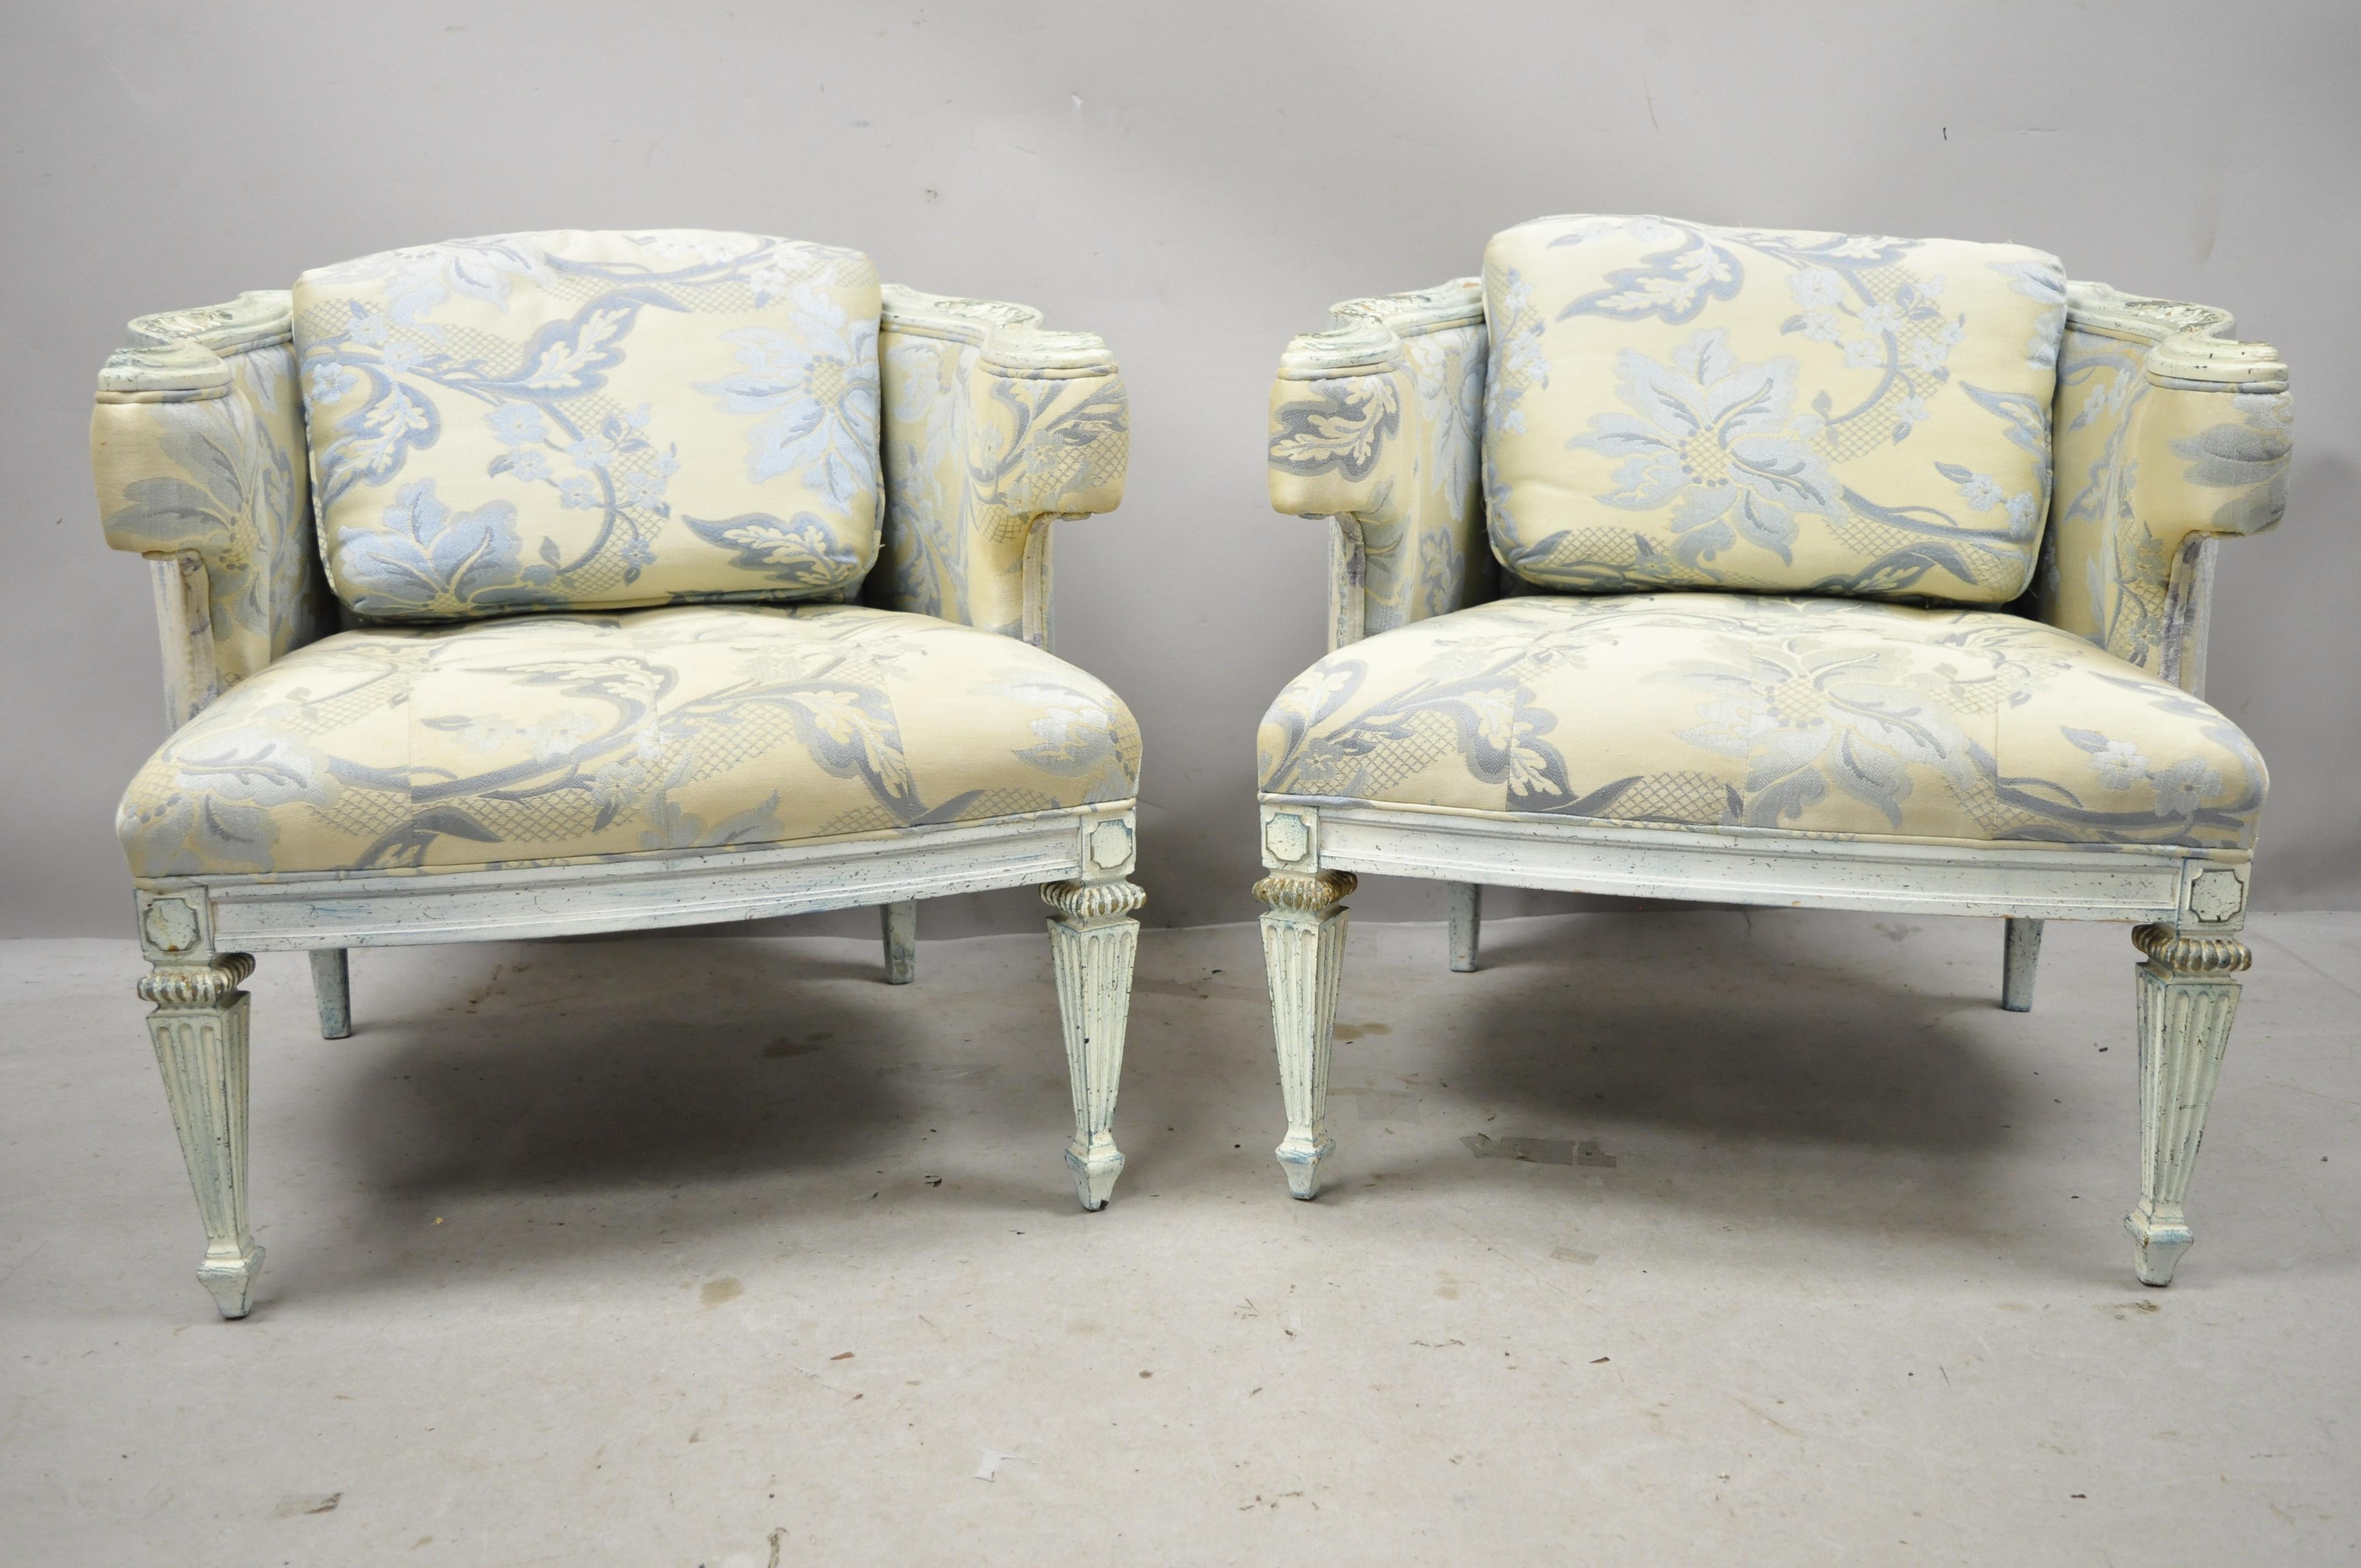 Vintage French Provincial Louis XVI blue and cream painted lounge club chairs - a pair. Item features solid wood frame, blue distressed finish, tapered legs, great style and form, circa mid-20th century. Measurements: 25